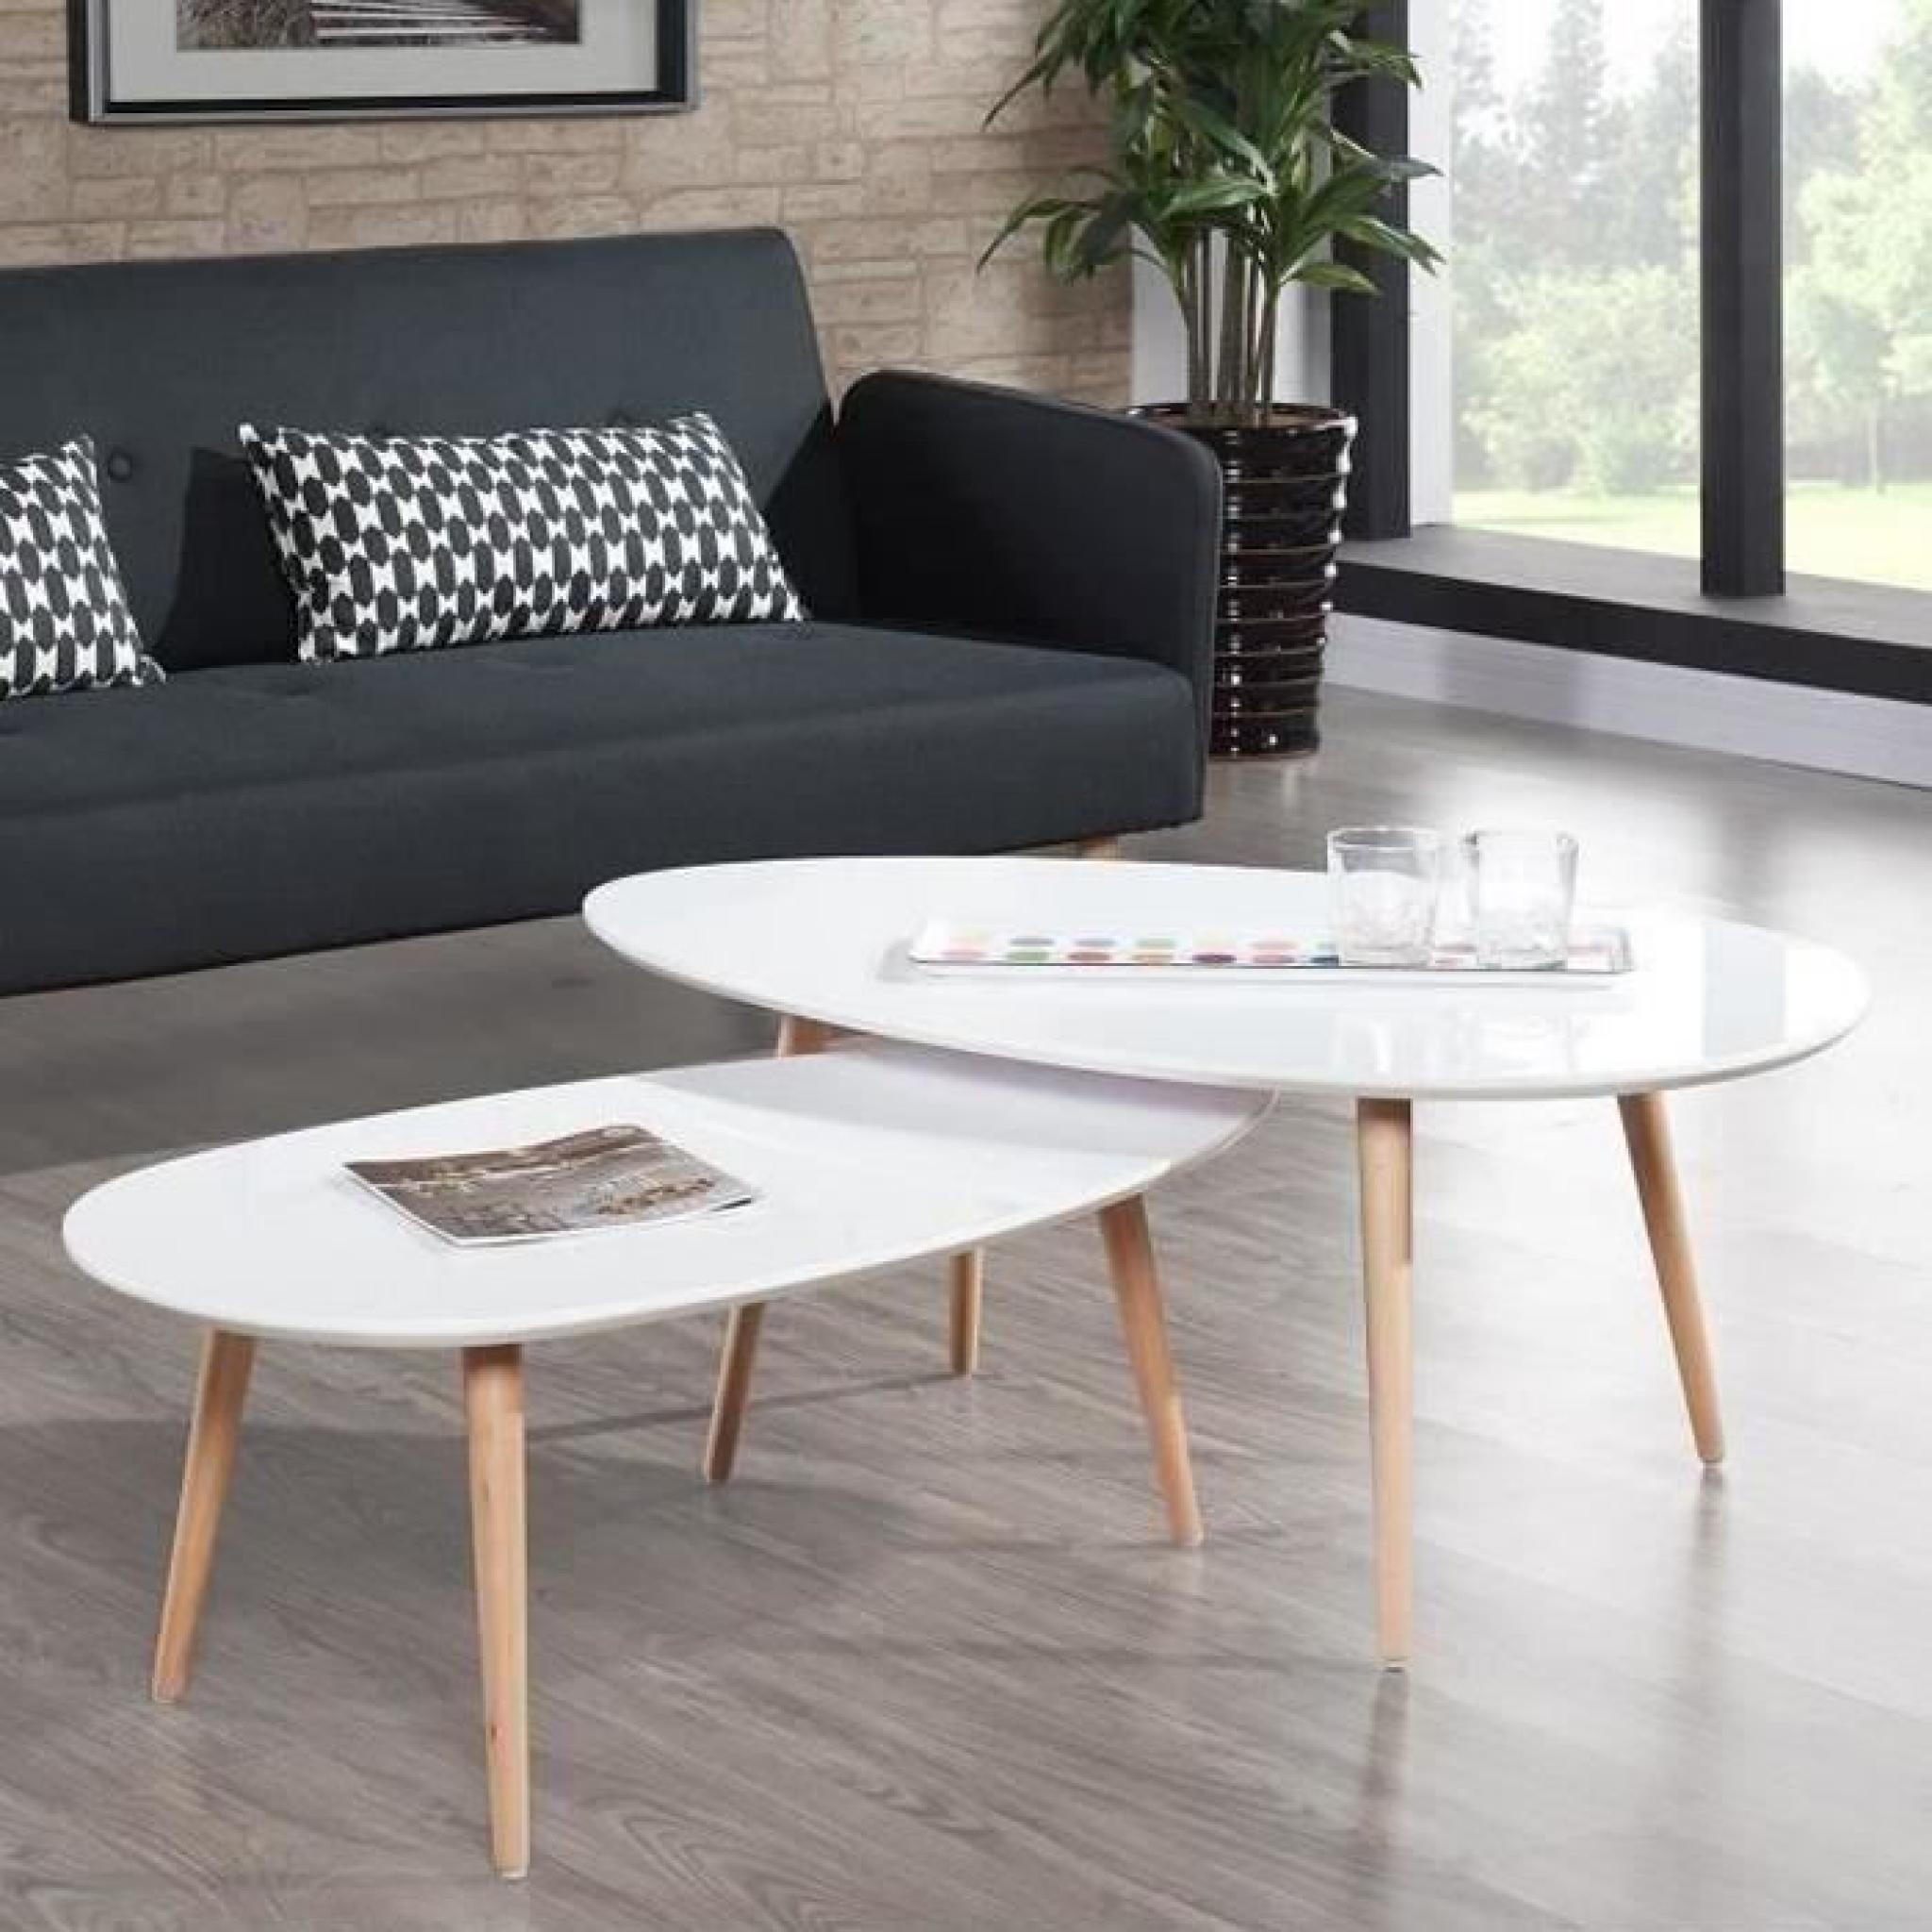 Table basse pas cher cdiscount